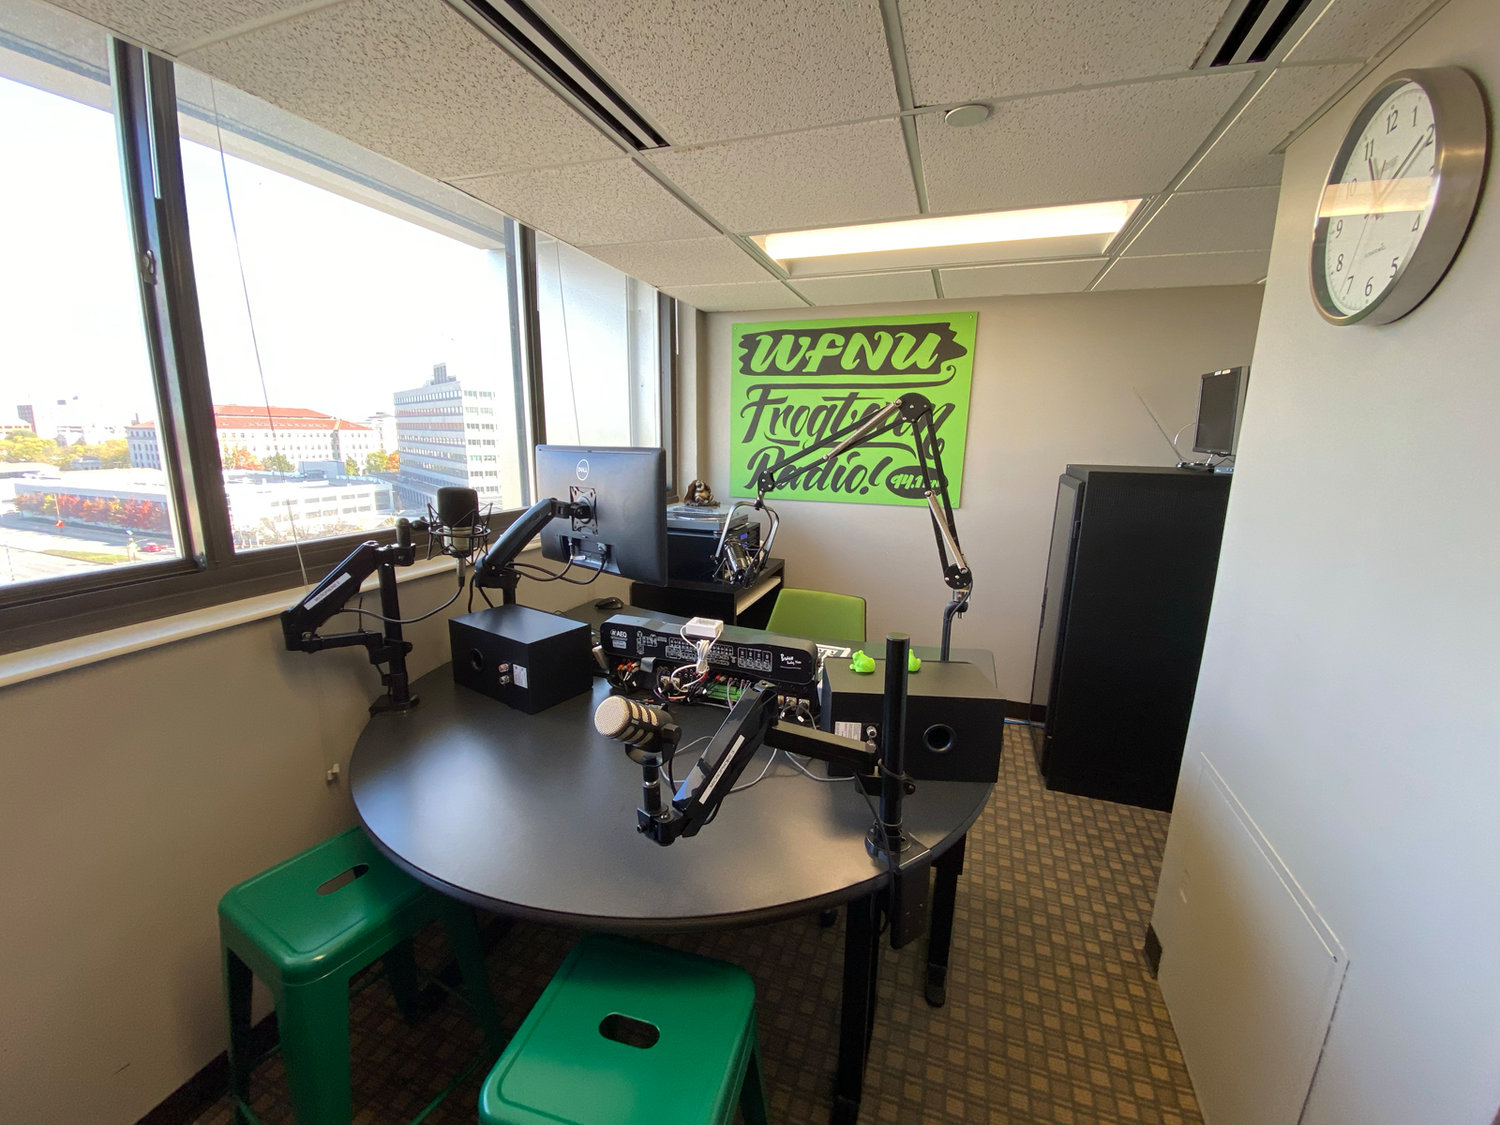 The WFNU office suite in the Capitol Ridge Building (Photo by Tesha M. Christensen)